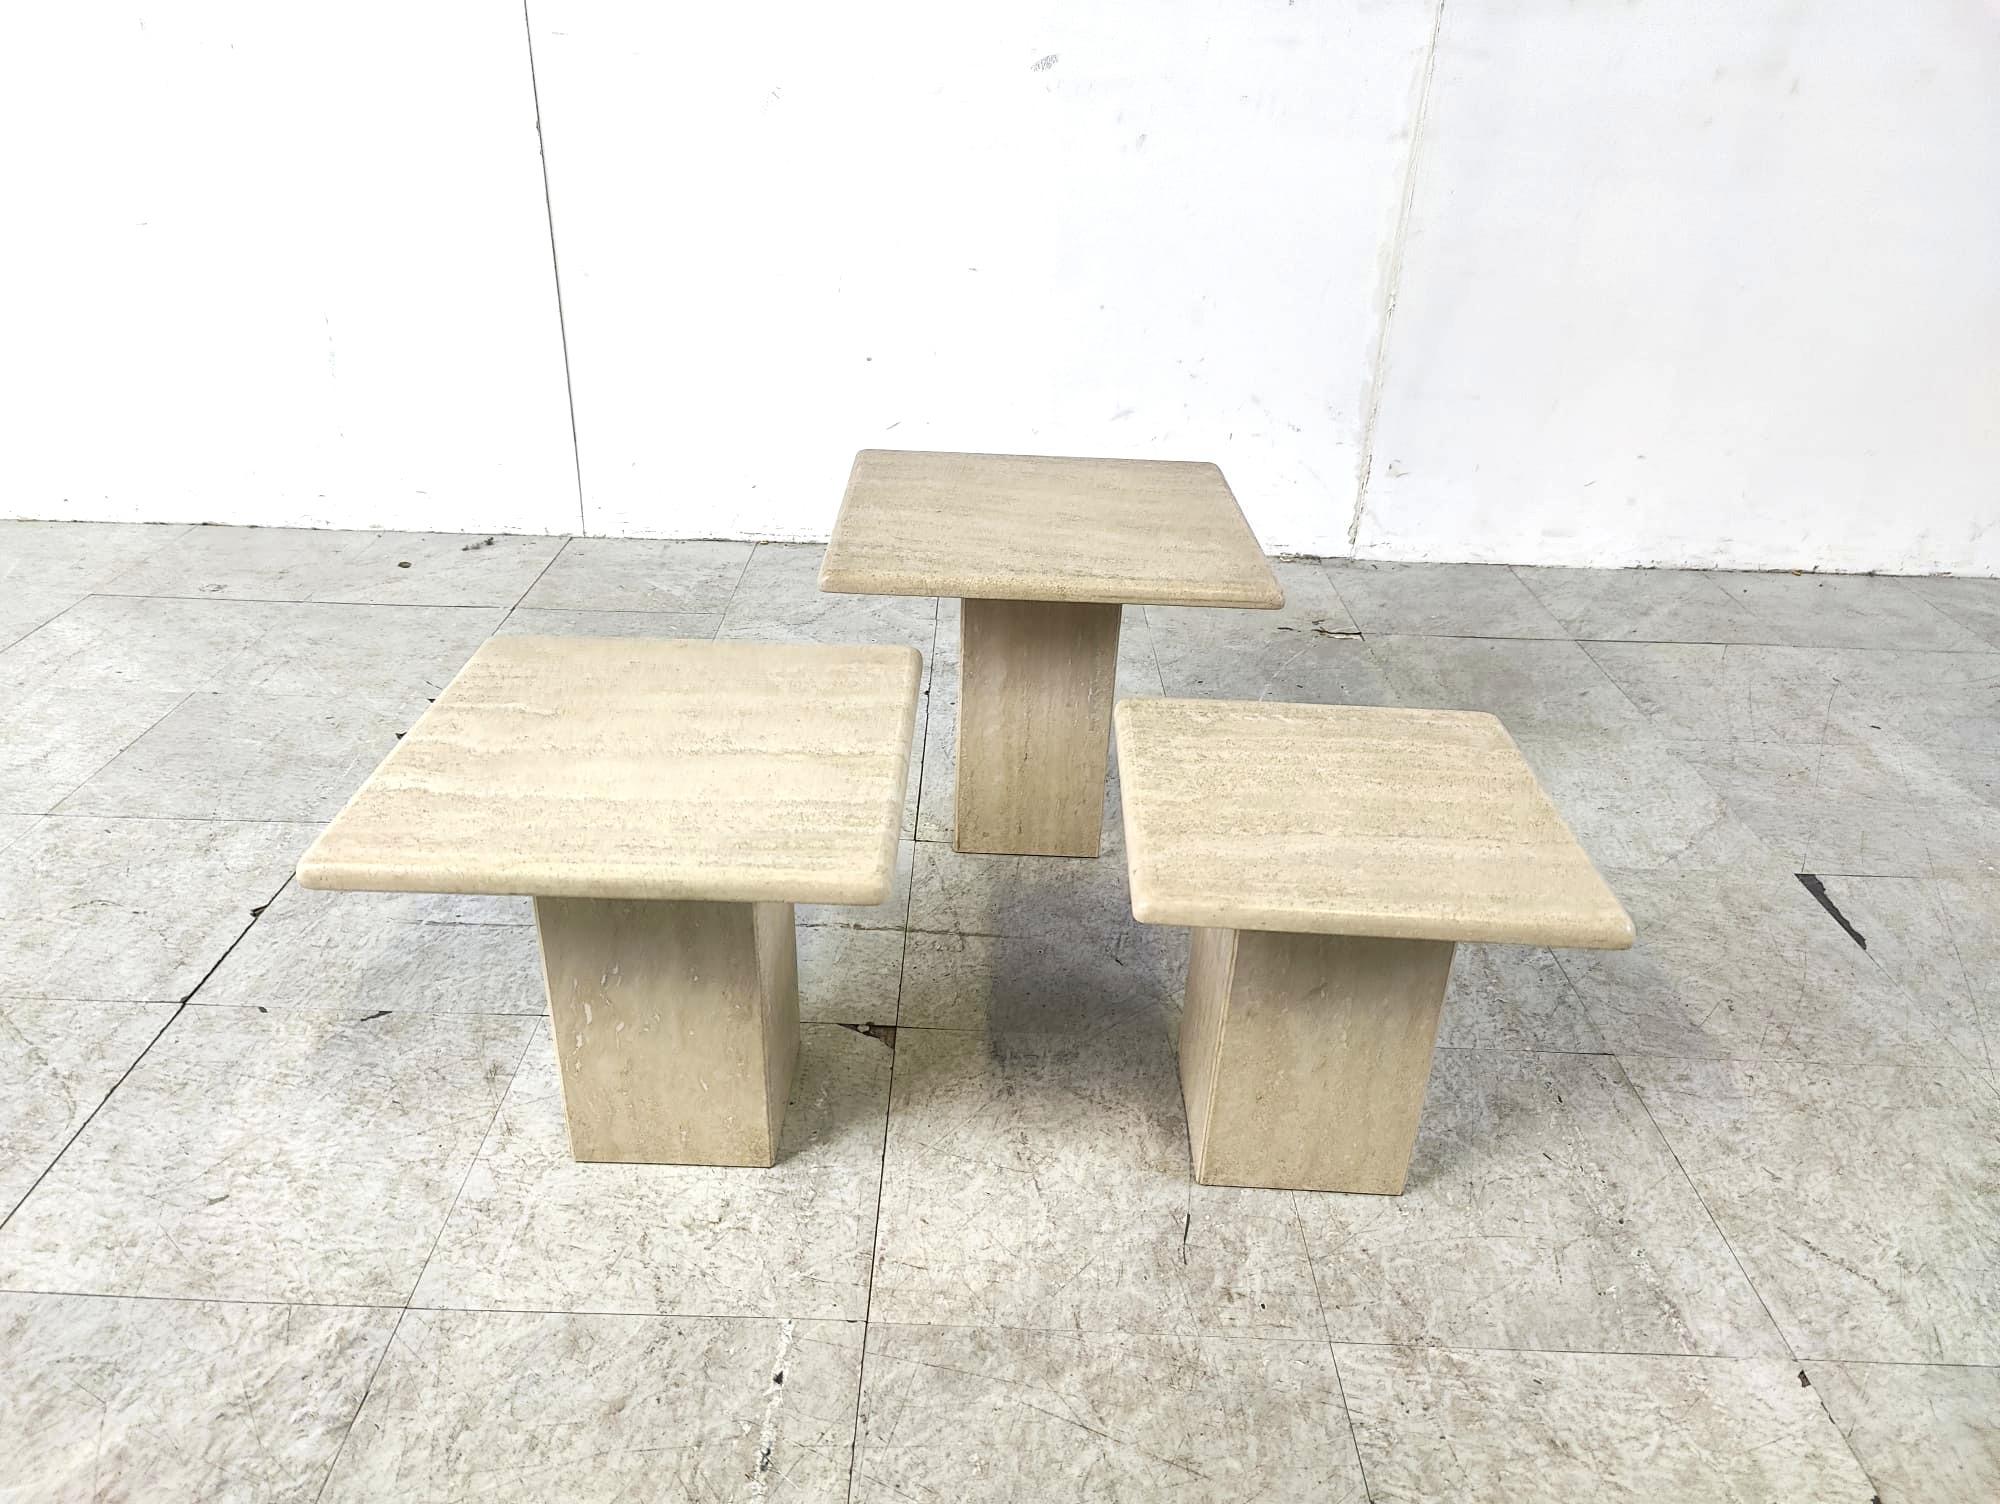 Set of 1970s italian travertine stone nesting tables or side tables.

The tables can be set up in different compositions. Timeless items.

Beautiful colour.

Good condition

1970s - italy

Dimensions:
Large table: 40x40x35cm height
Medium table: